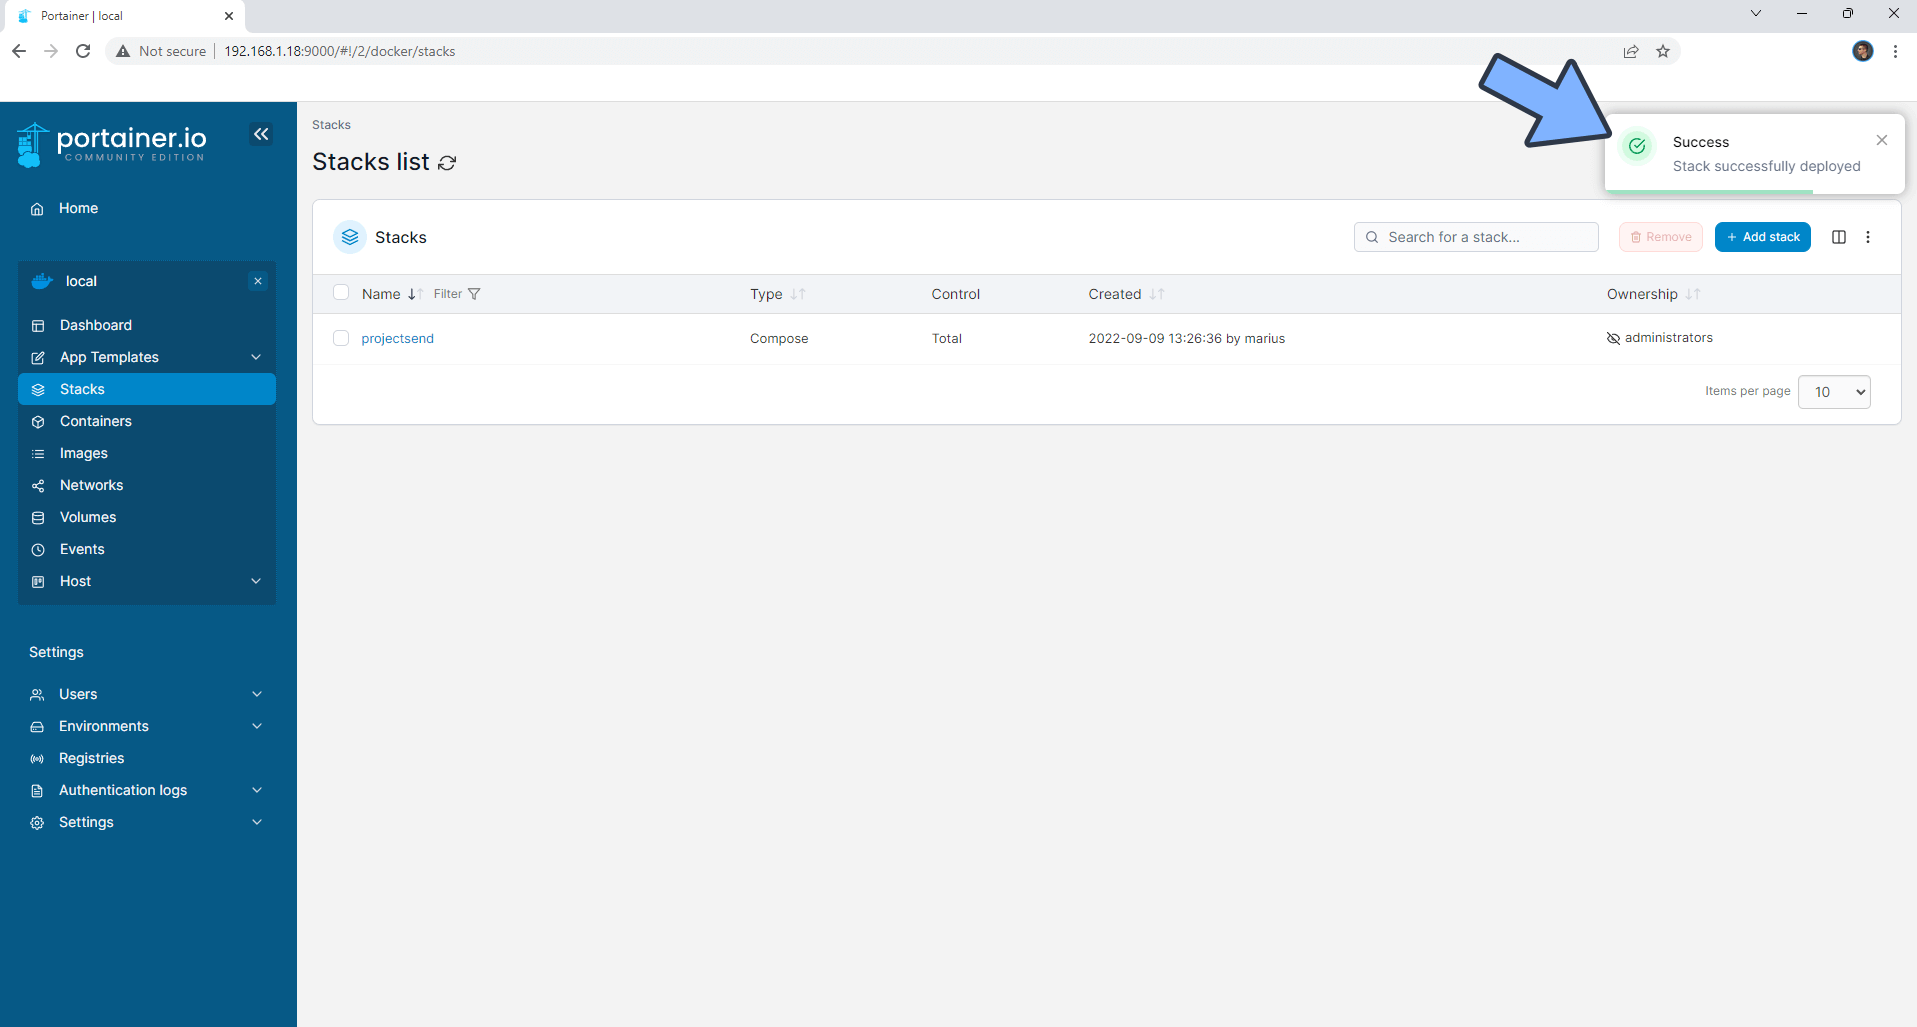 3 ProjectSend Synology NAS Set up